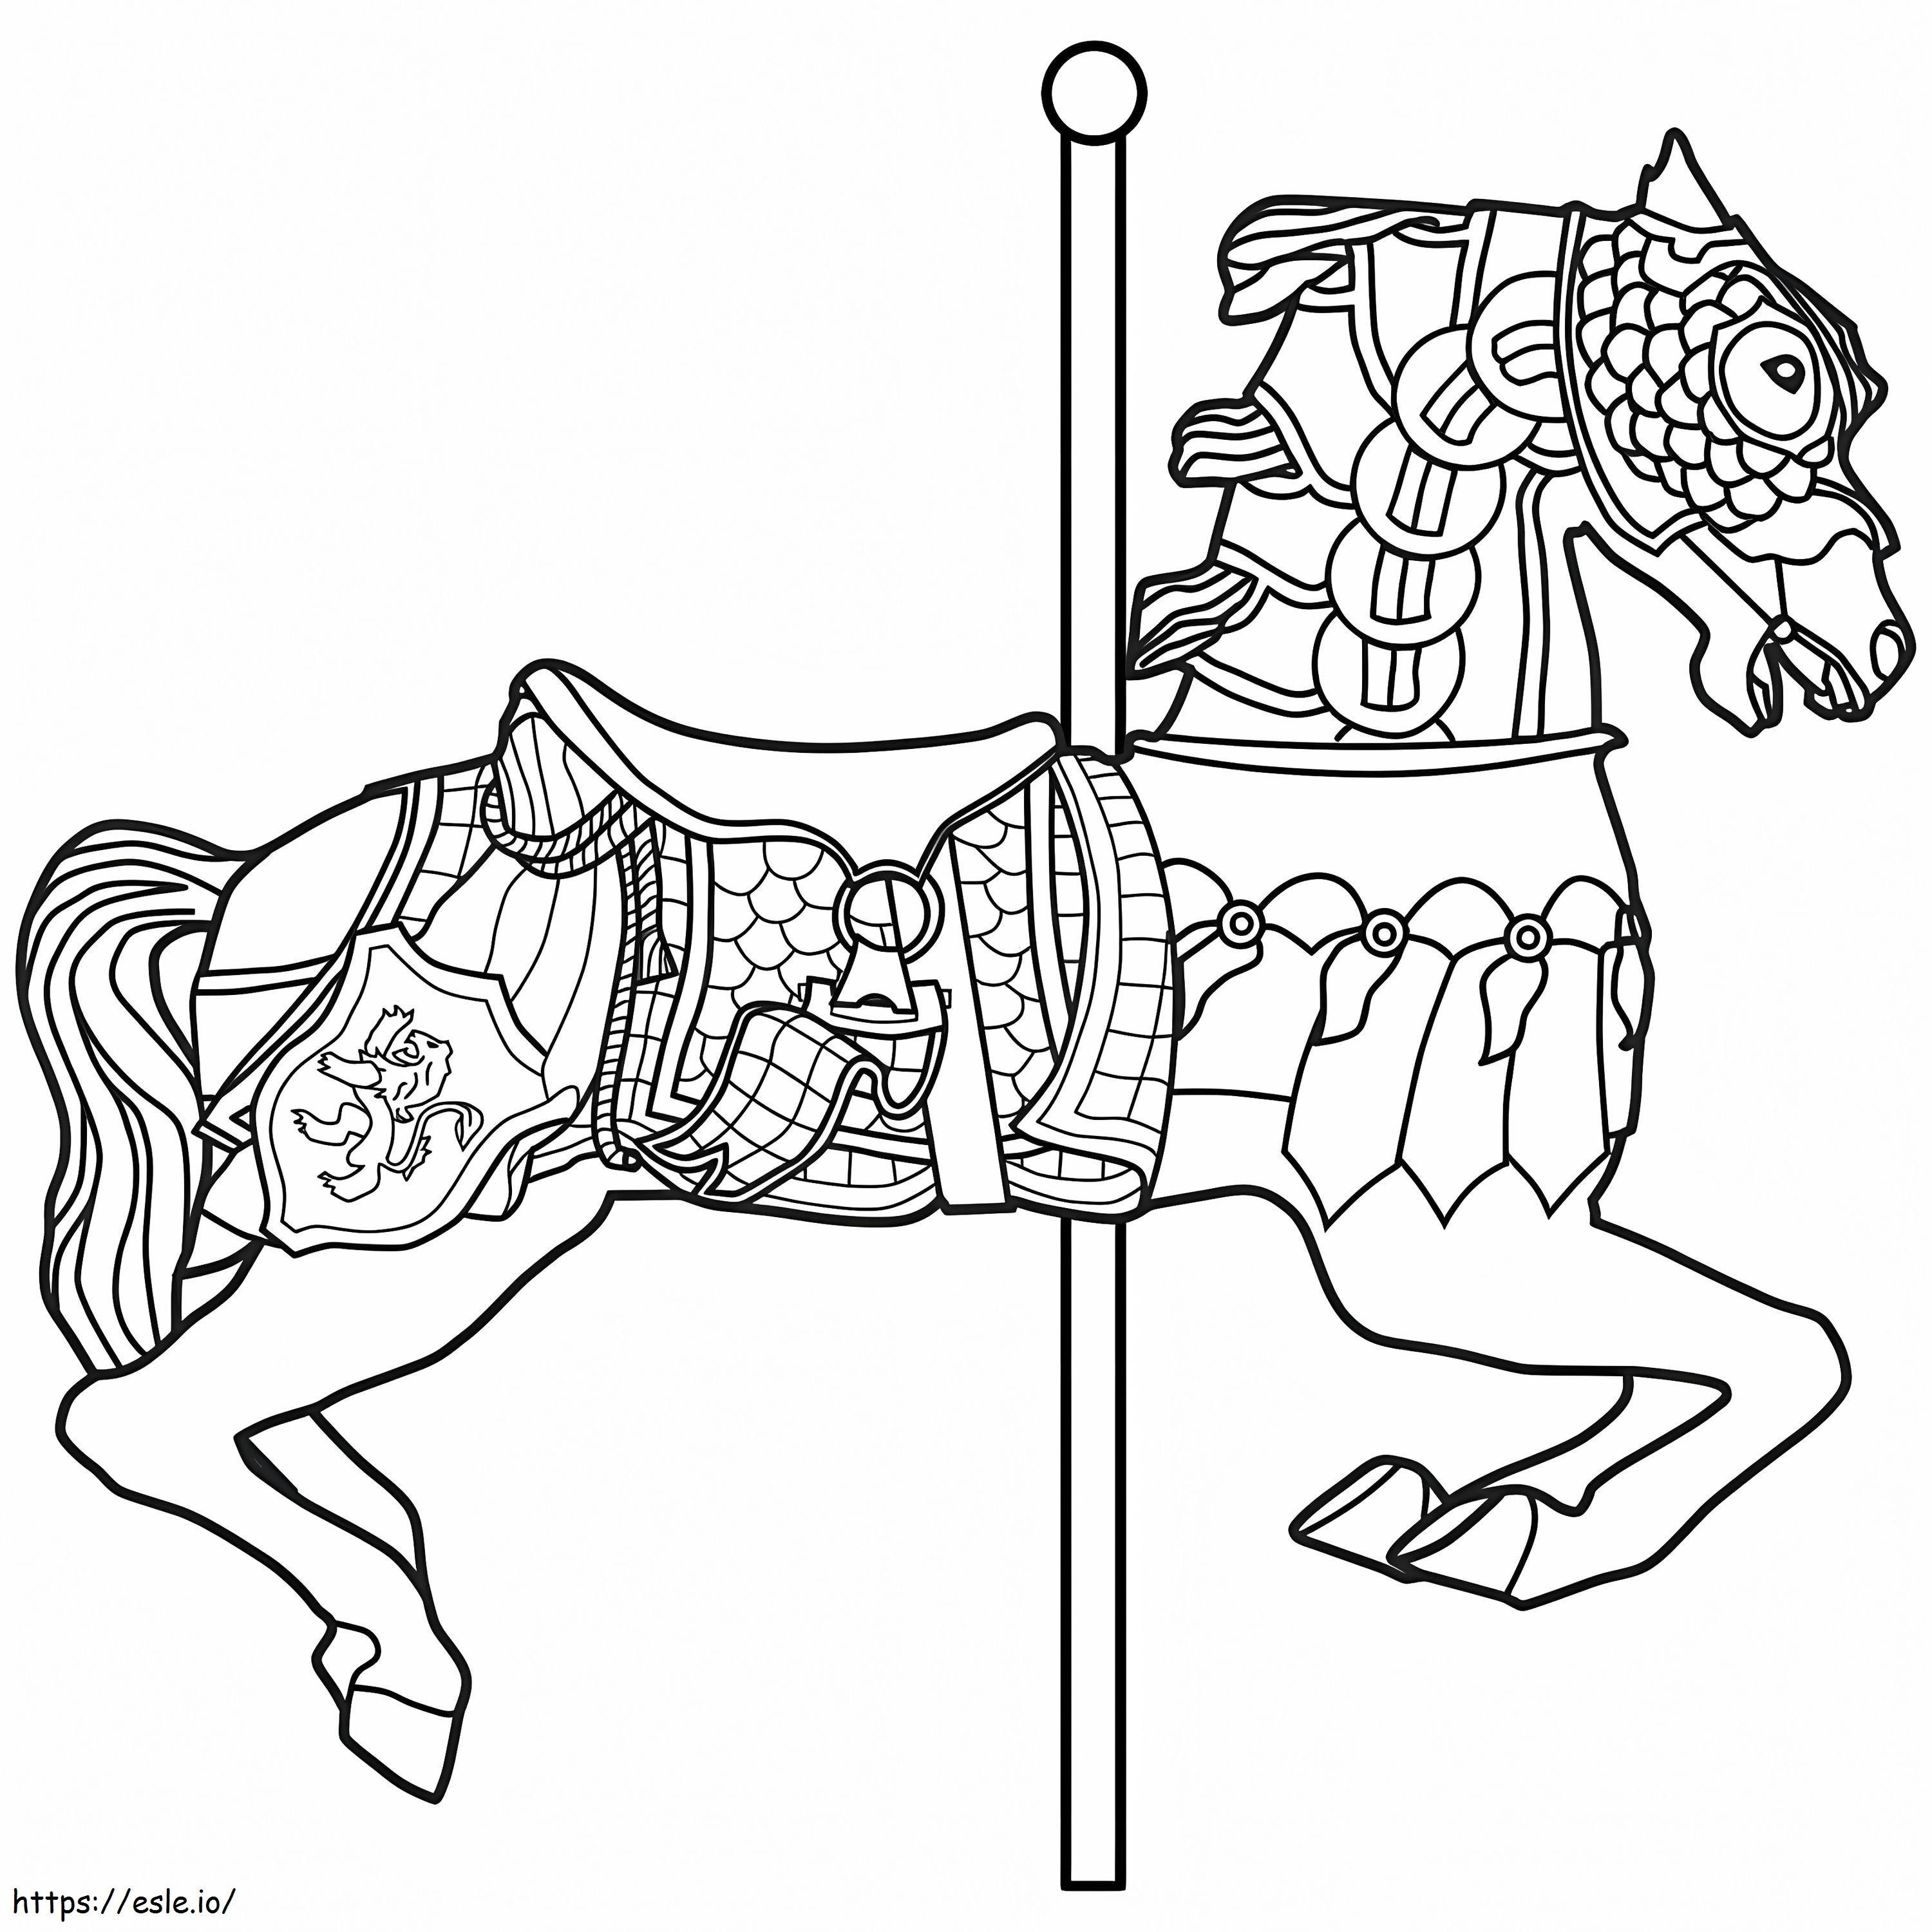 Free Carousel coloring page